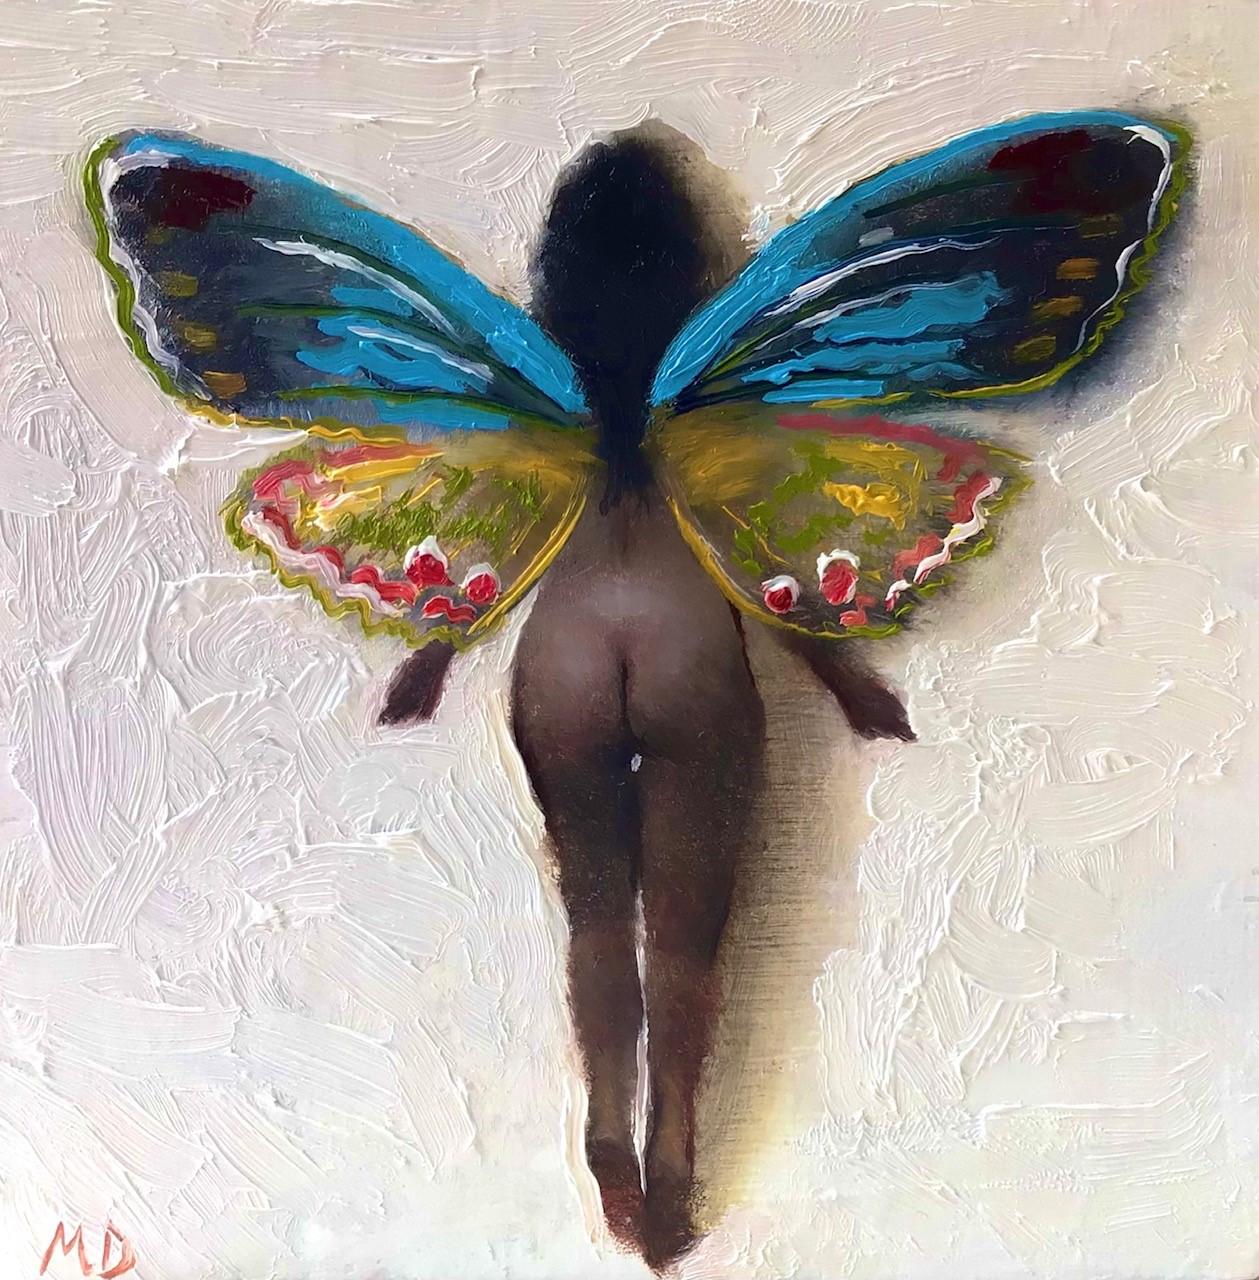 Matteo Di Ventra Nude Painting - "Hidden Fairy" Oil Painting